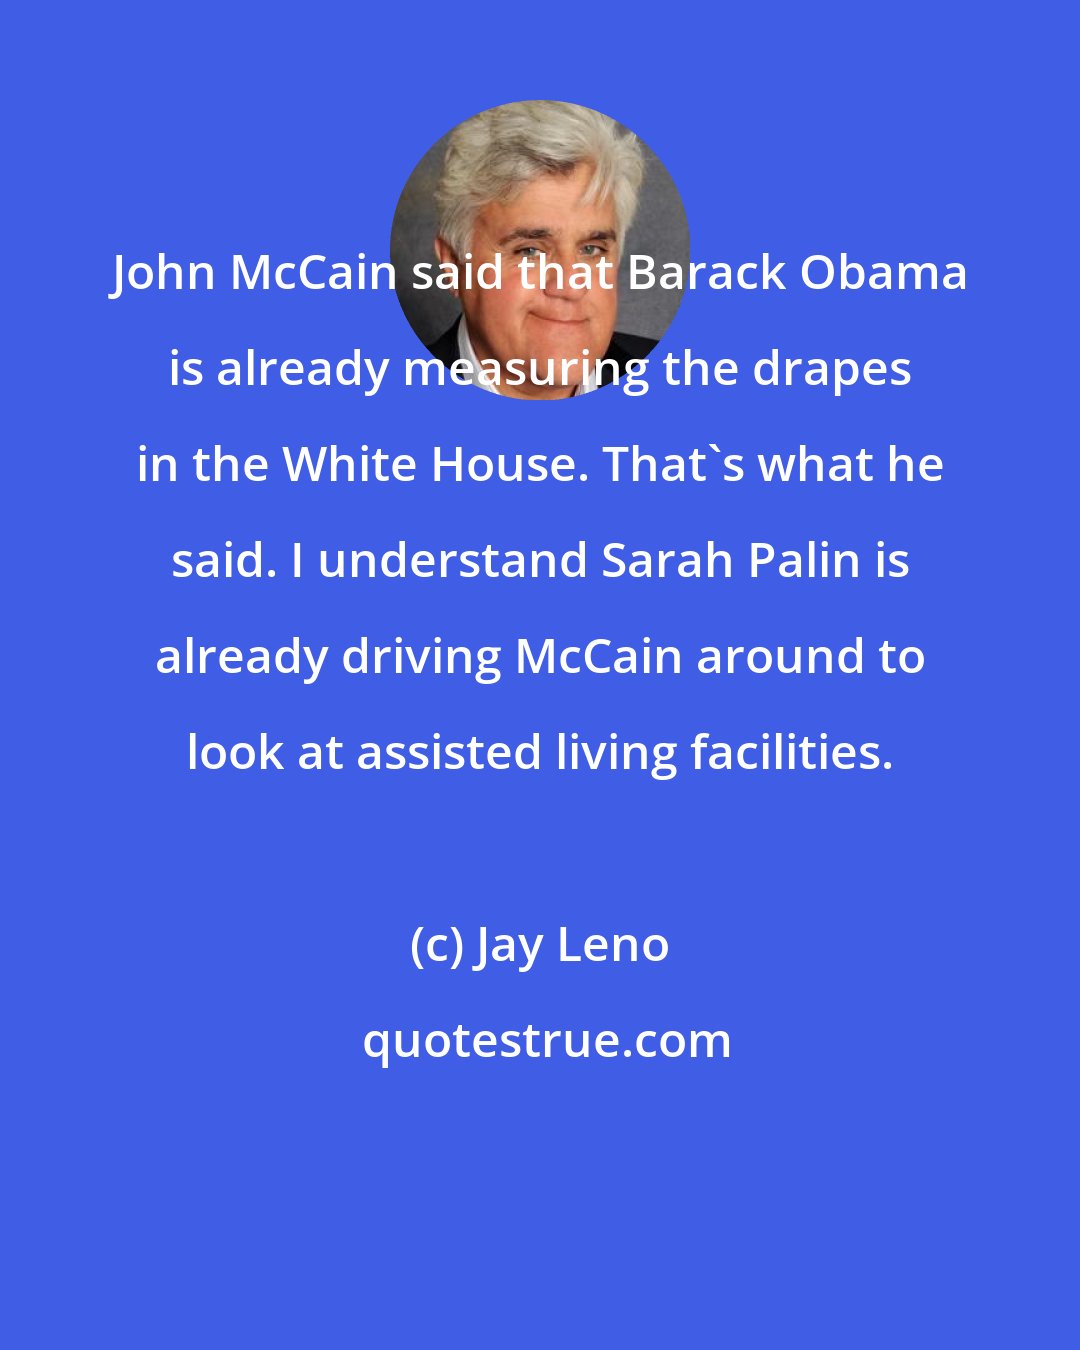 Jay Leno: John McCain said that Barack Obama is already measuring the drapes in the White House. That's what he said. I understand Sarah Palin is already driving McCain around to look at assisted living facilities.